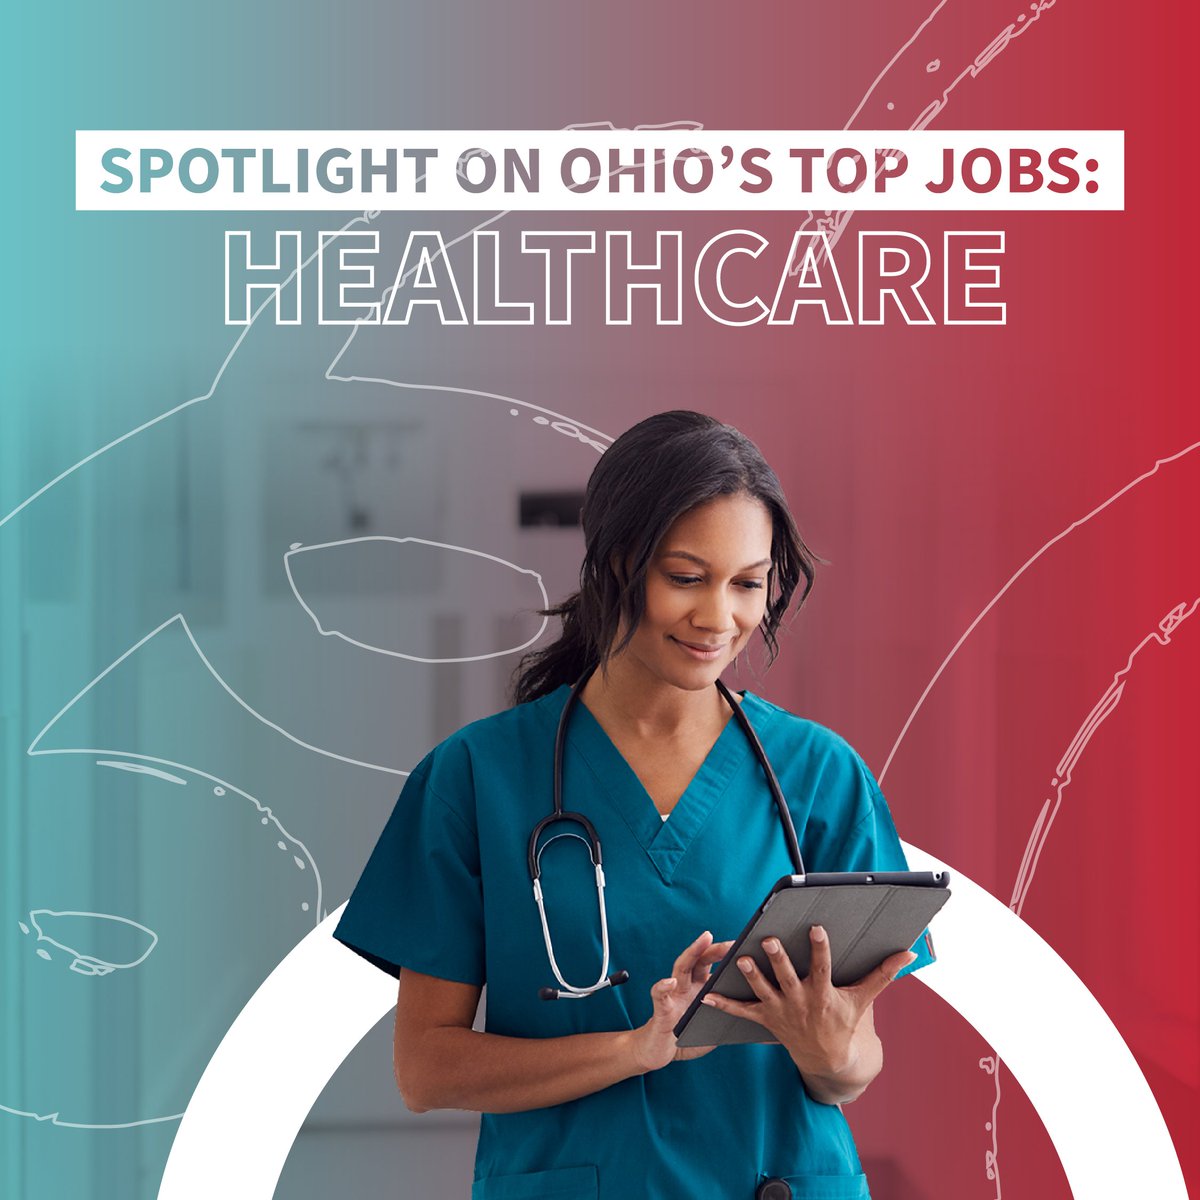 Find and pursue a path in healthcare with the help of OhioMeansJobs! #OhioMeansJobs #Healthcare #JobOpenings #TrainingOpportunities